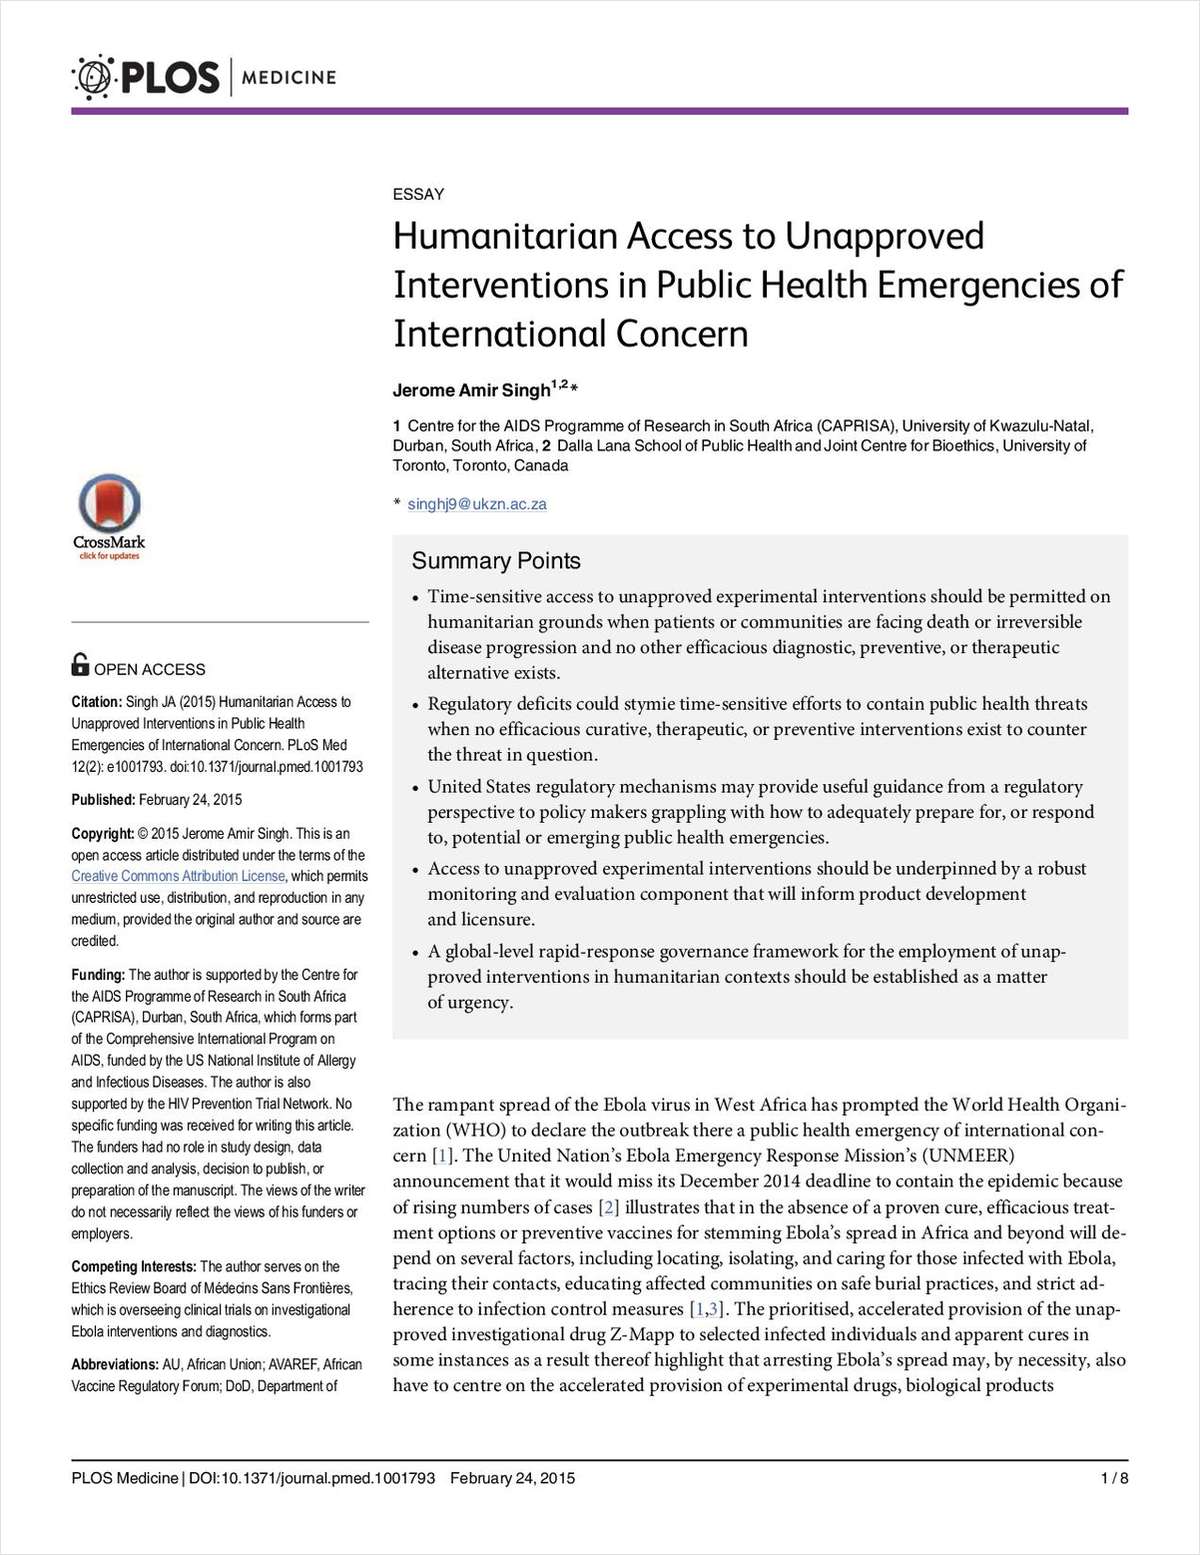 Humanitarian Access to Unapproved Interventions in Public Health Emergencies of International Concern